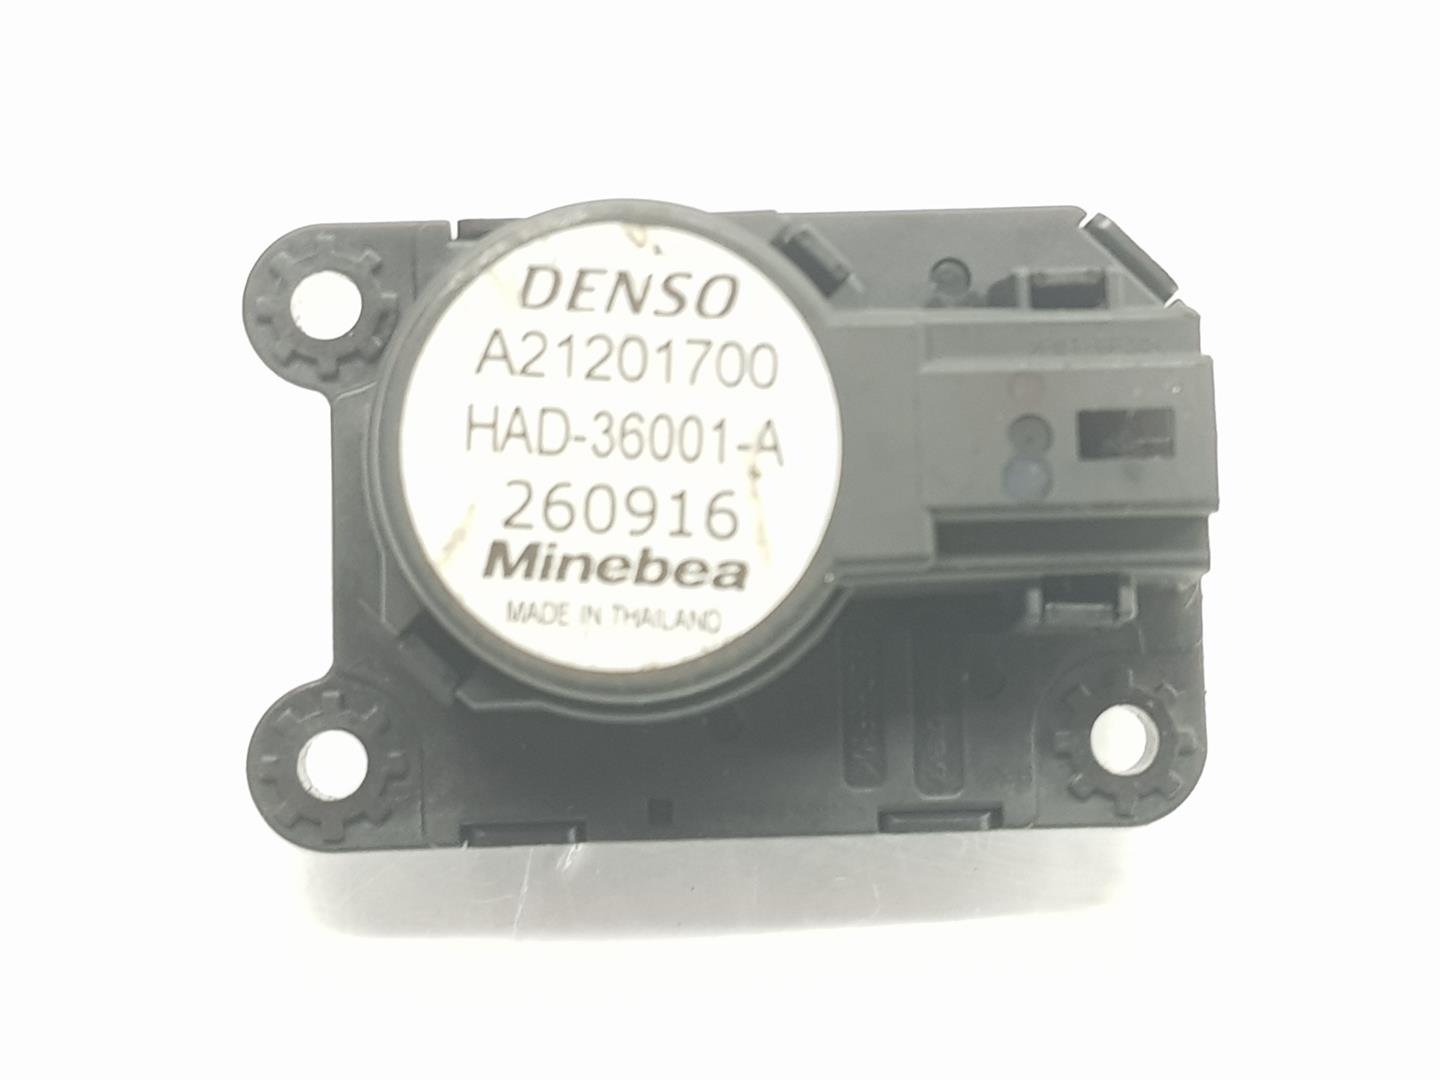 RENAULT Master 3 generation (2010-2023) Air Conditioner Air Flow Valve Motor A21201700, A21201700 24221940